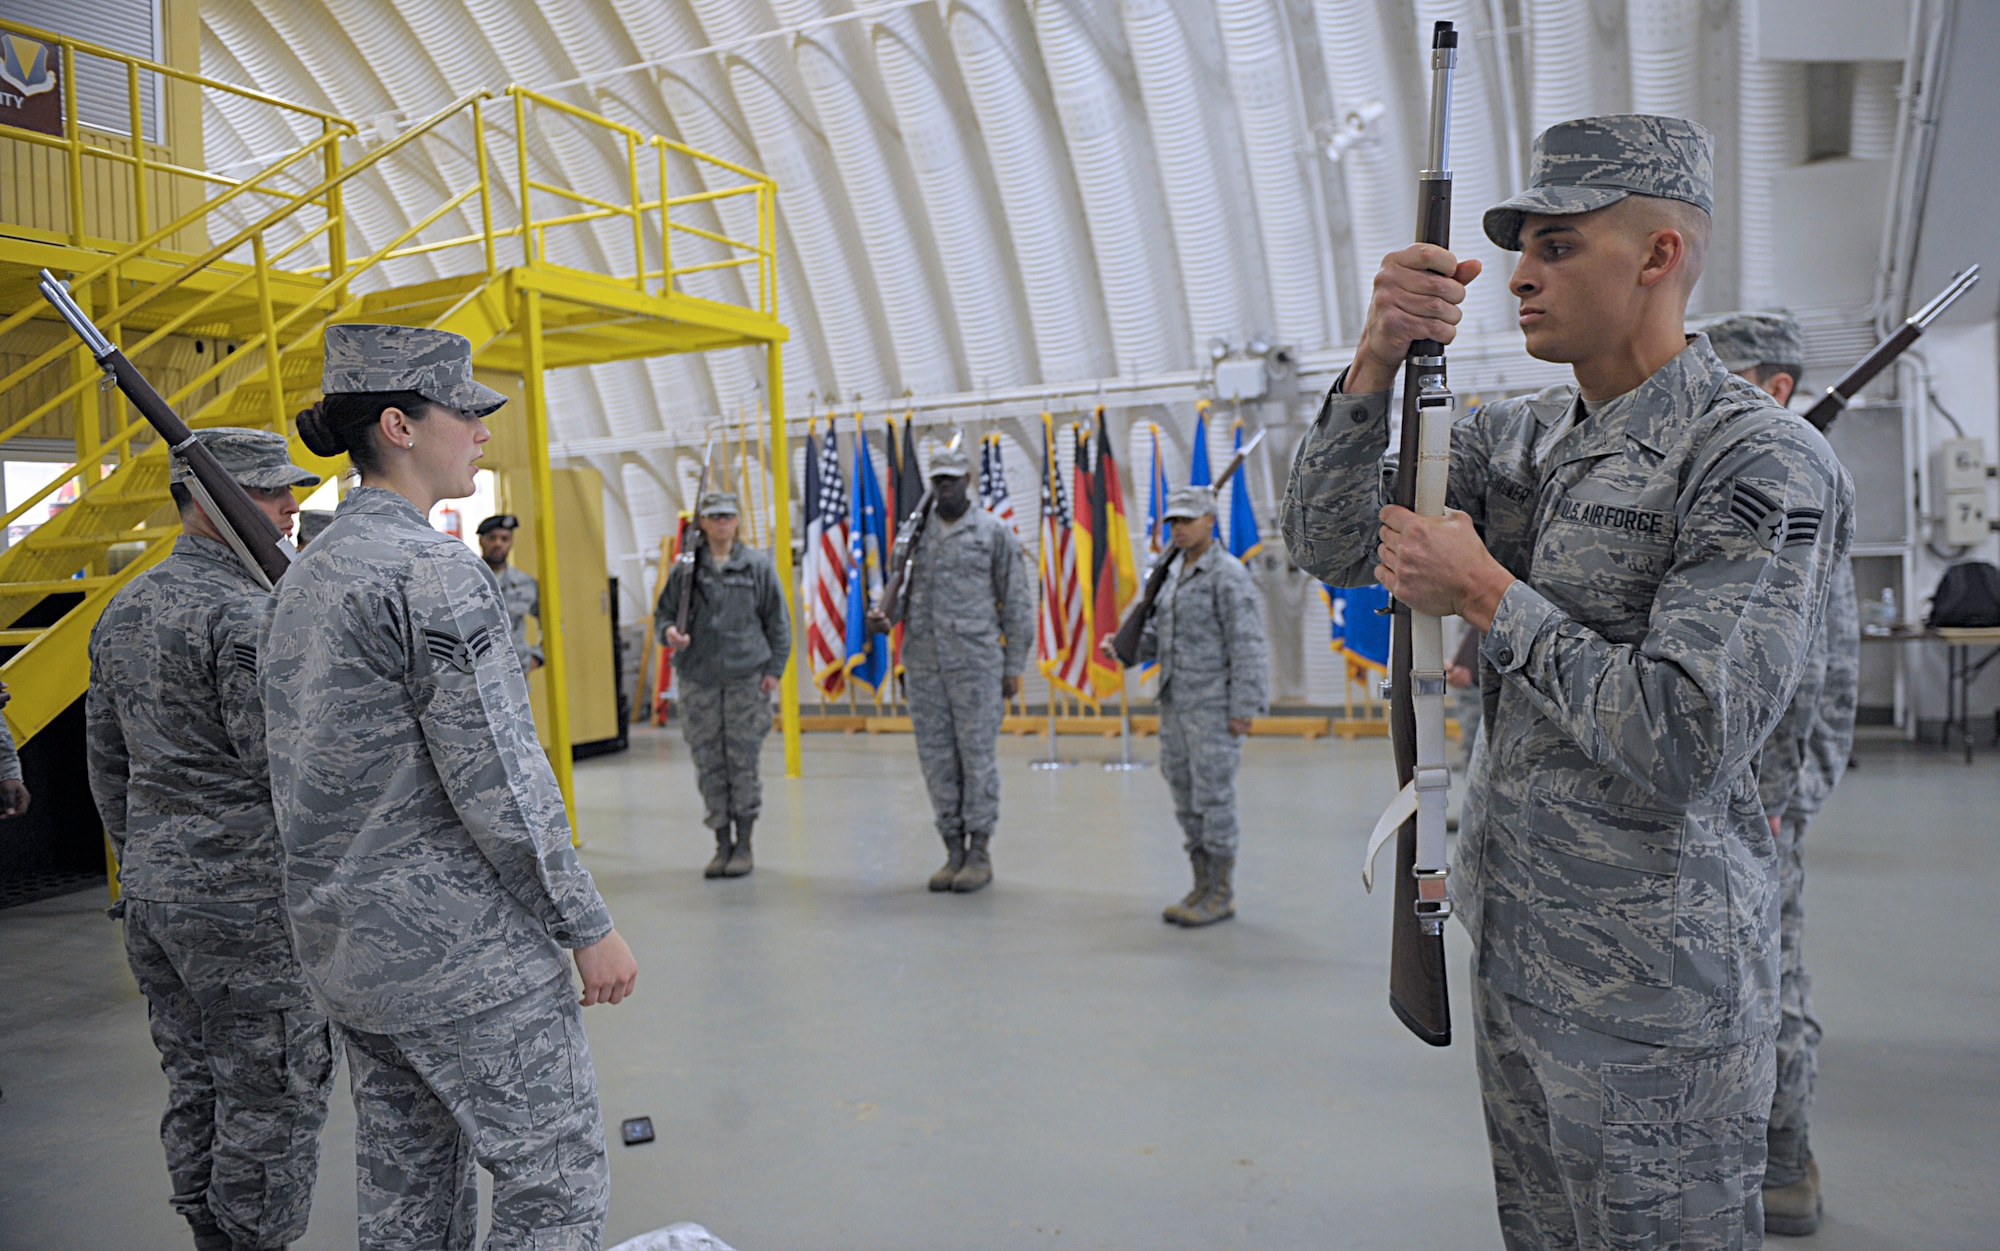 Senior Airman Angelo Hightower, U.S. Air Force Honor Guard Drill Team member, demonstrates the motions to perform right shoulder March 15, 2016, at Ramstein Air Base, Germany. Ramstein Honor Guard members got the opportunity to learn uniform preparation and color guard motions from U.S. Air Force Honor Guard members. (U.S. Air Force photo/Staff Sgt. Timothy Moore)